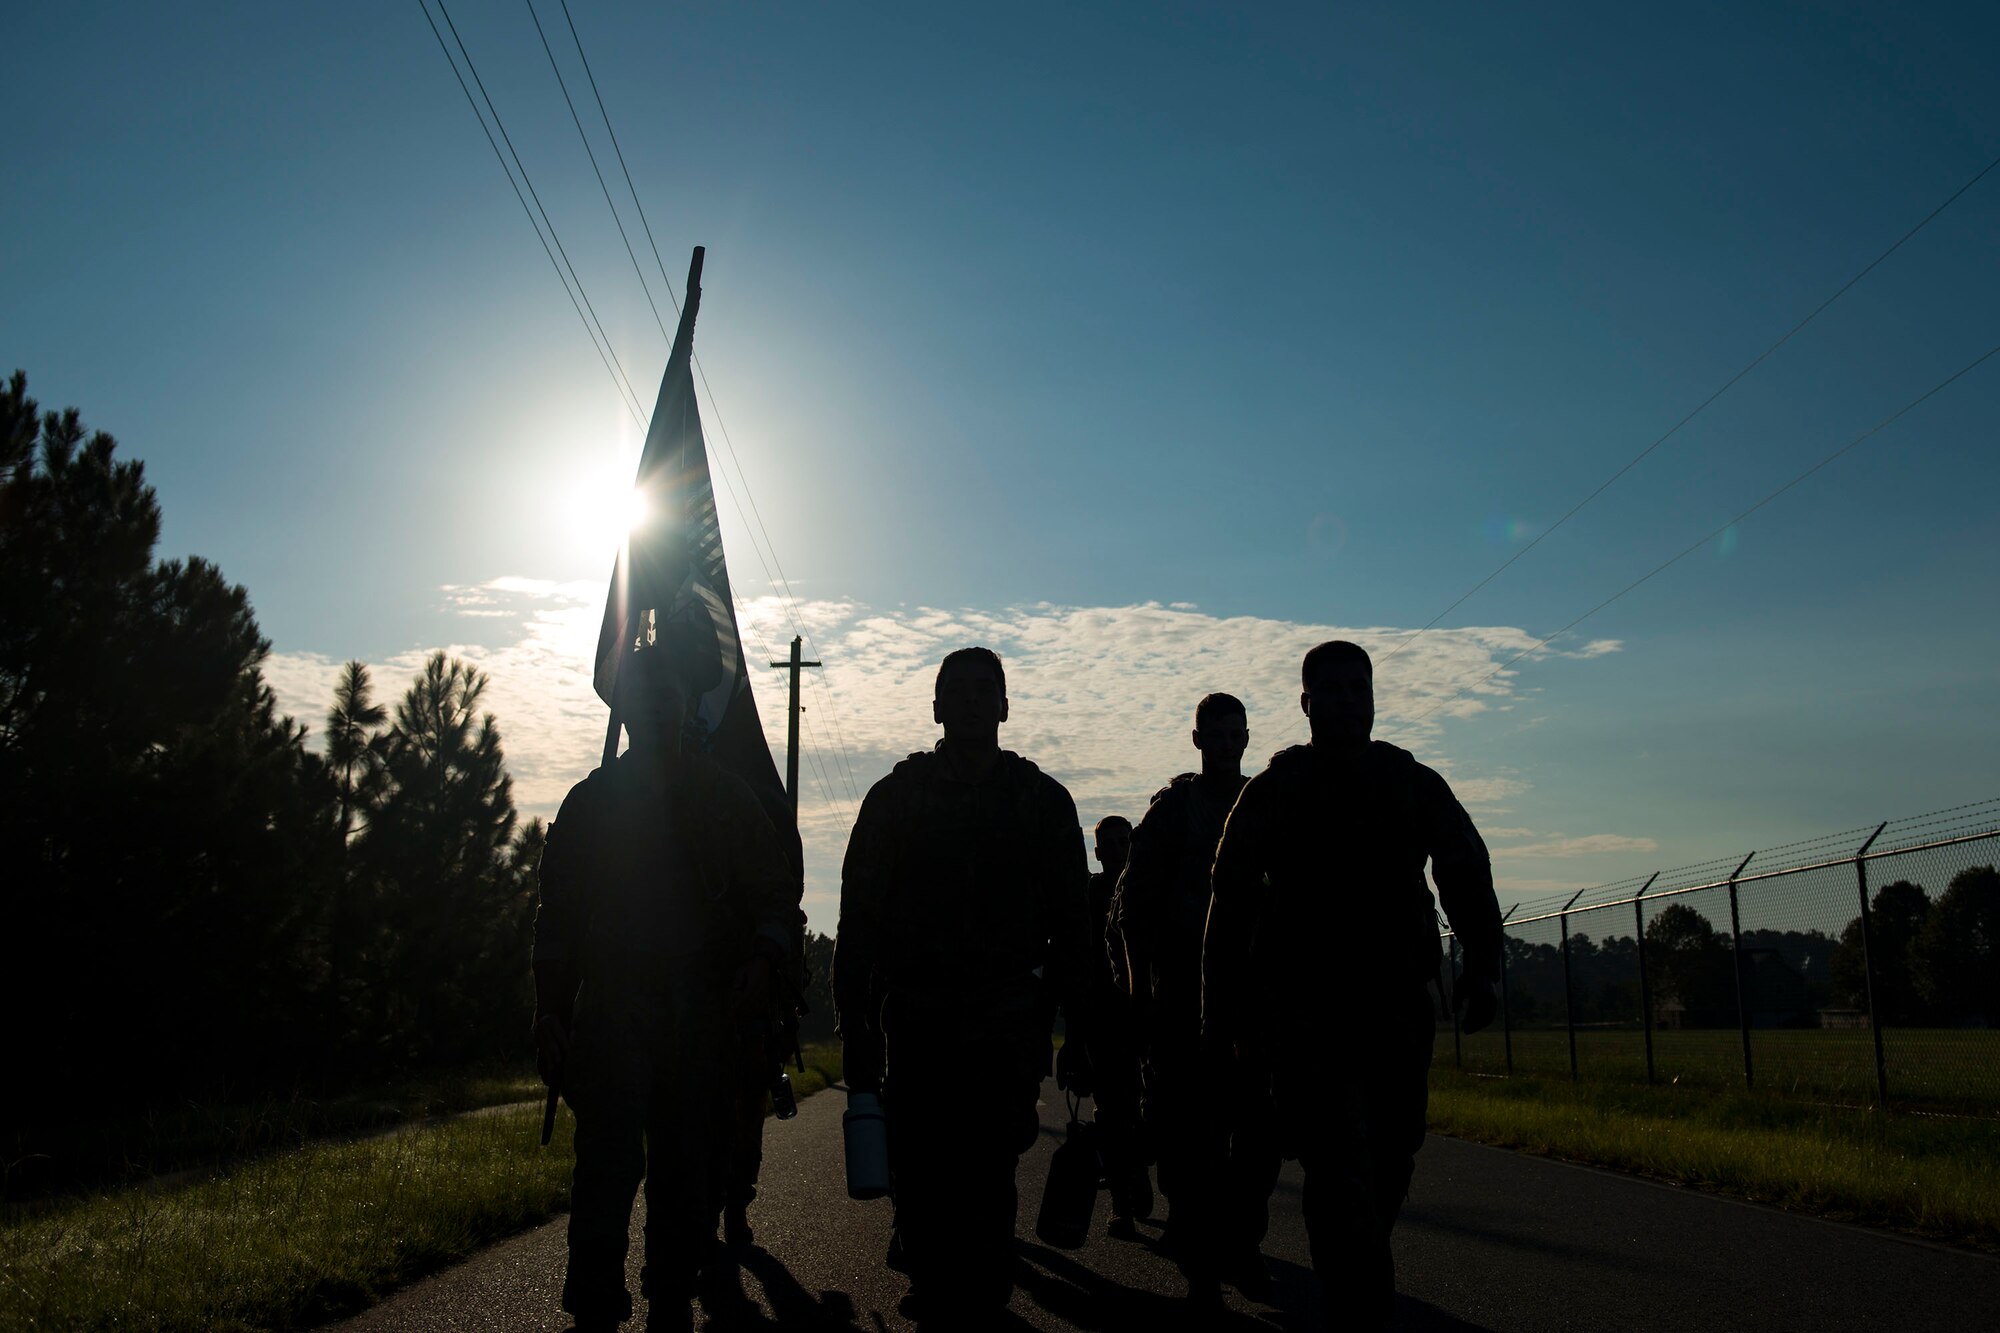 Airmen from the 822d Base Defense Squadron participate in the POW/MIA Recognition Day ruck march, Sept. 21, 2018, at Moody Air Force Base, Ga. For the first-time, the 347th Operations Support Squadron hosted a ruck march to pay tribute to those who’ve been captured or missing in the line of duty by carrying a POW/MIA flag for 24 hours. (U.S. Air Force photo by Airman 1st Class Erick Requadt)